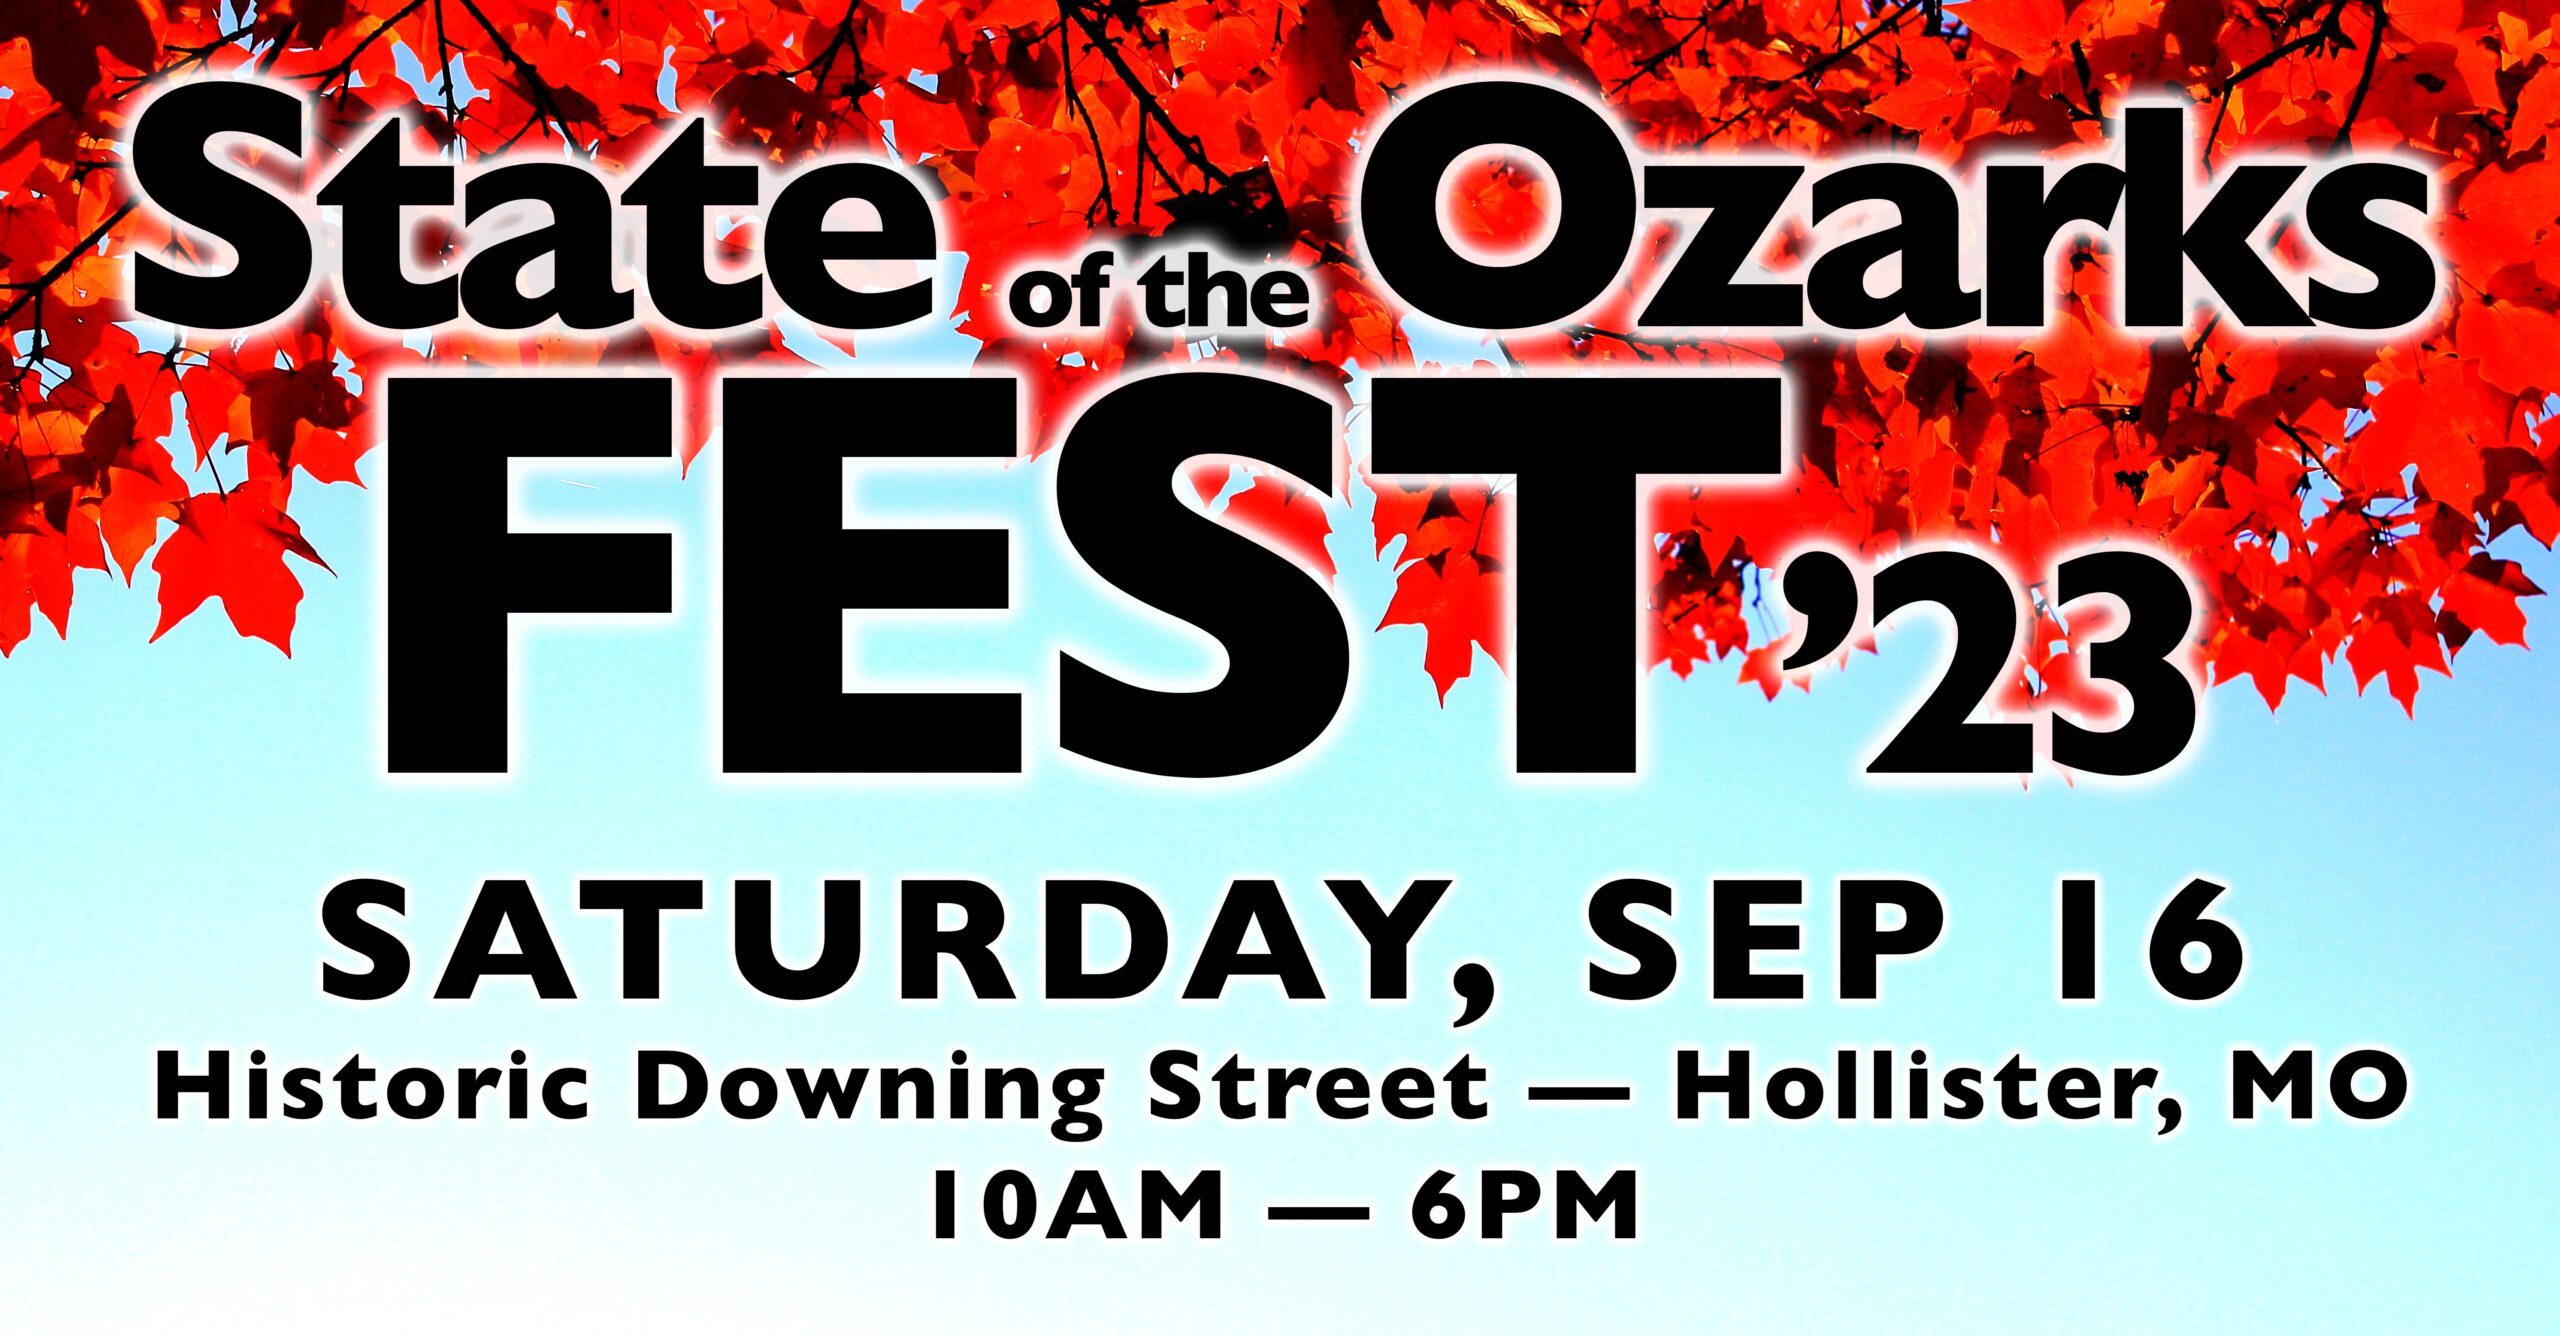 State of the Ozarks Fest 23 Saturday September 16 Historic Downing Street Hollister Missouri 10AM to 6PM